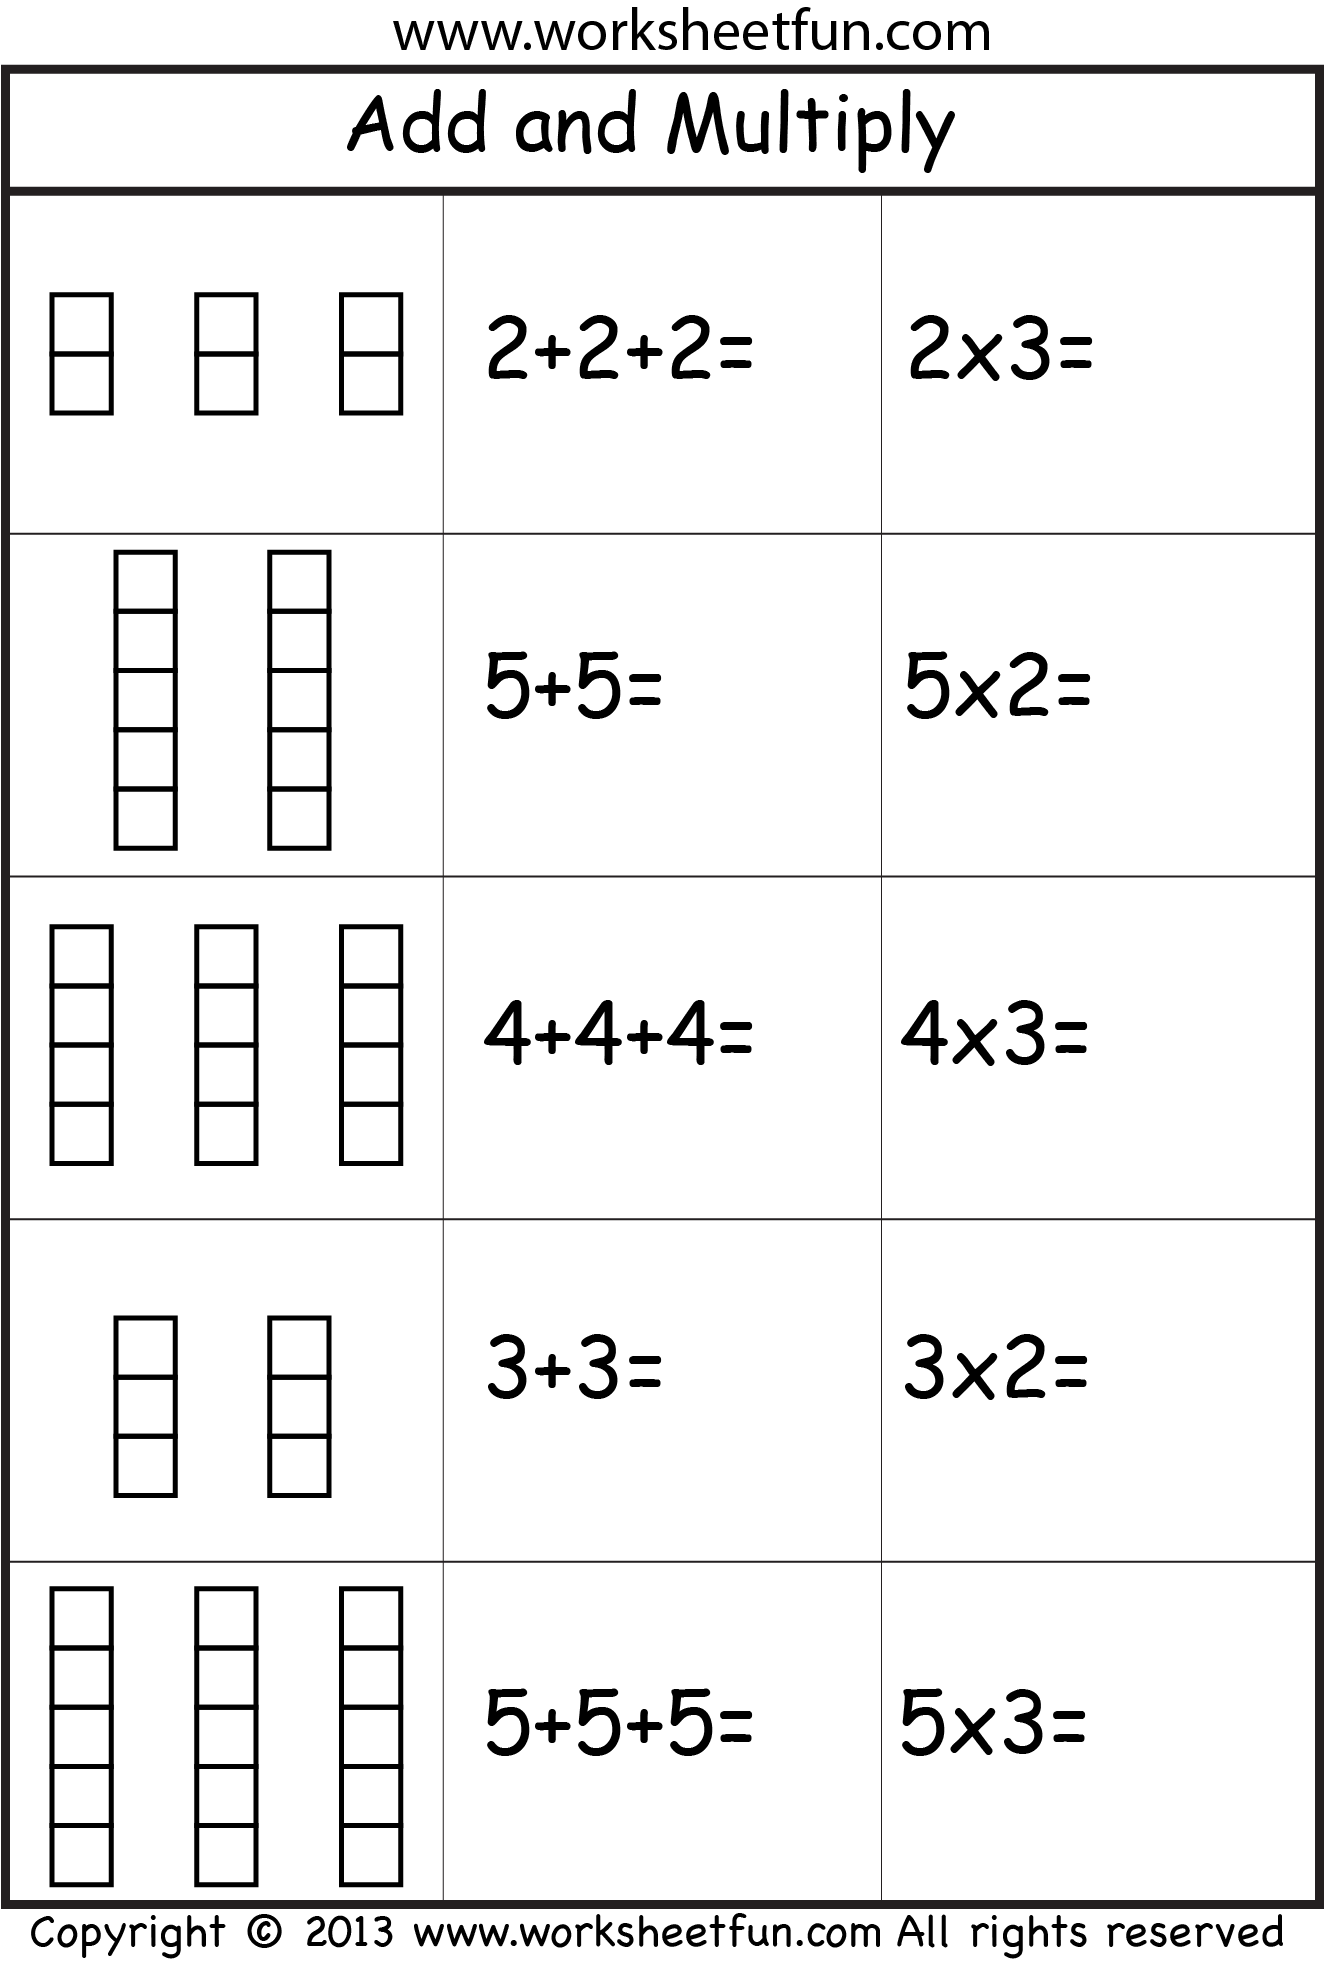 Repetitive Multiplication Worksheets